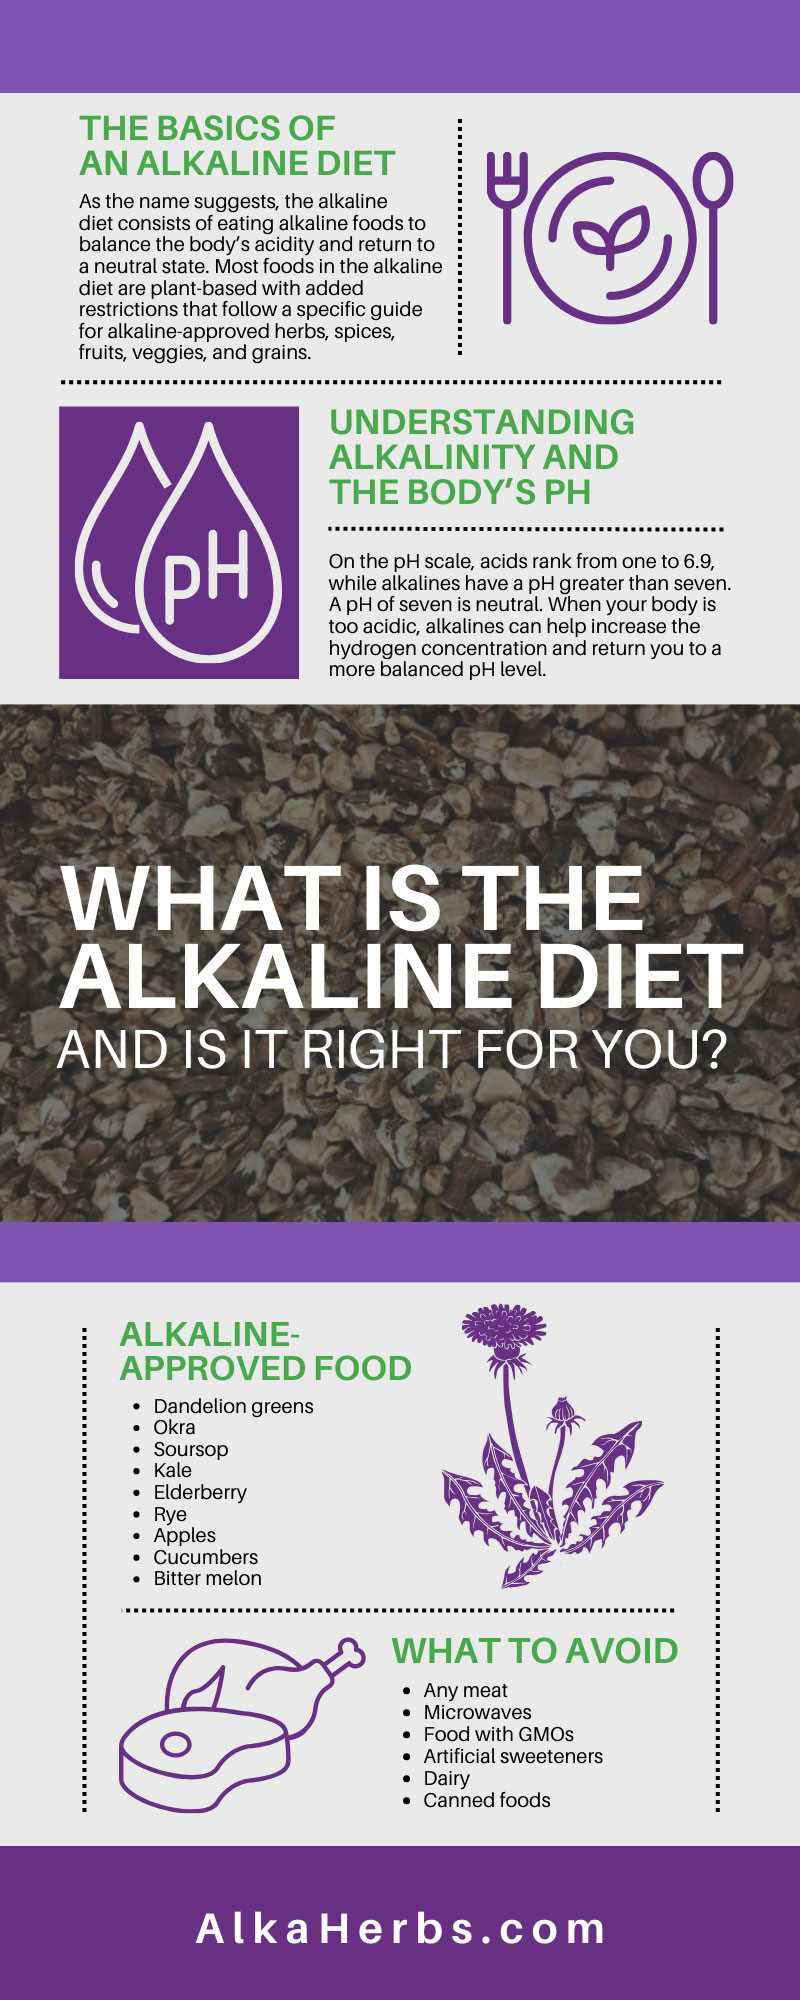 What Is the Alkaline Diet and Is It Right for You?